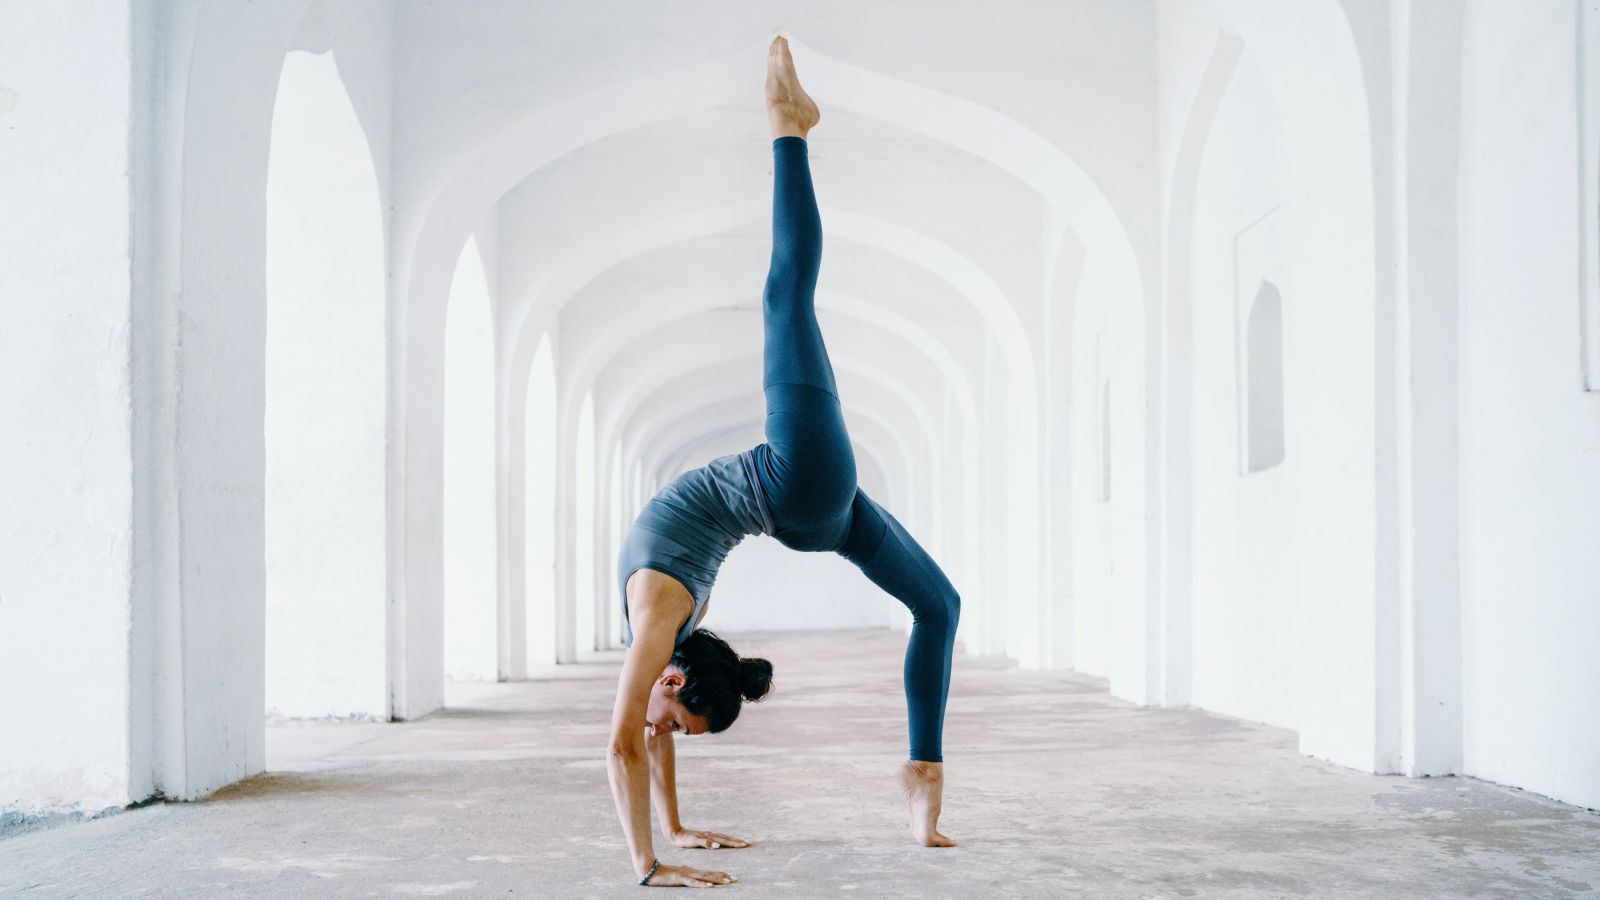 a woman performing a yoga pose in a corridor of a white building